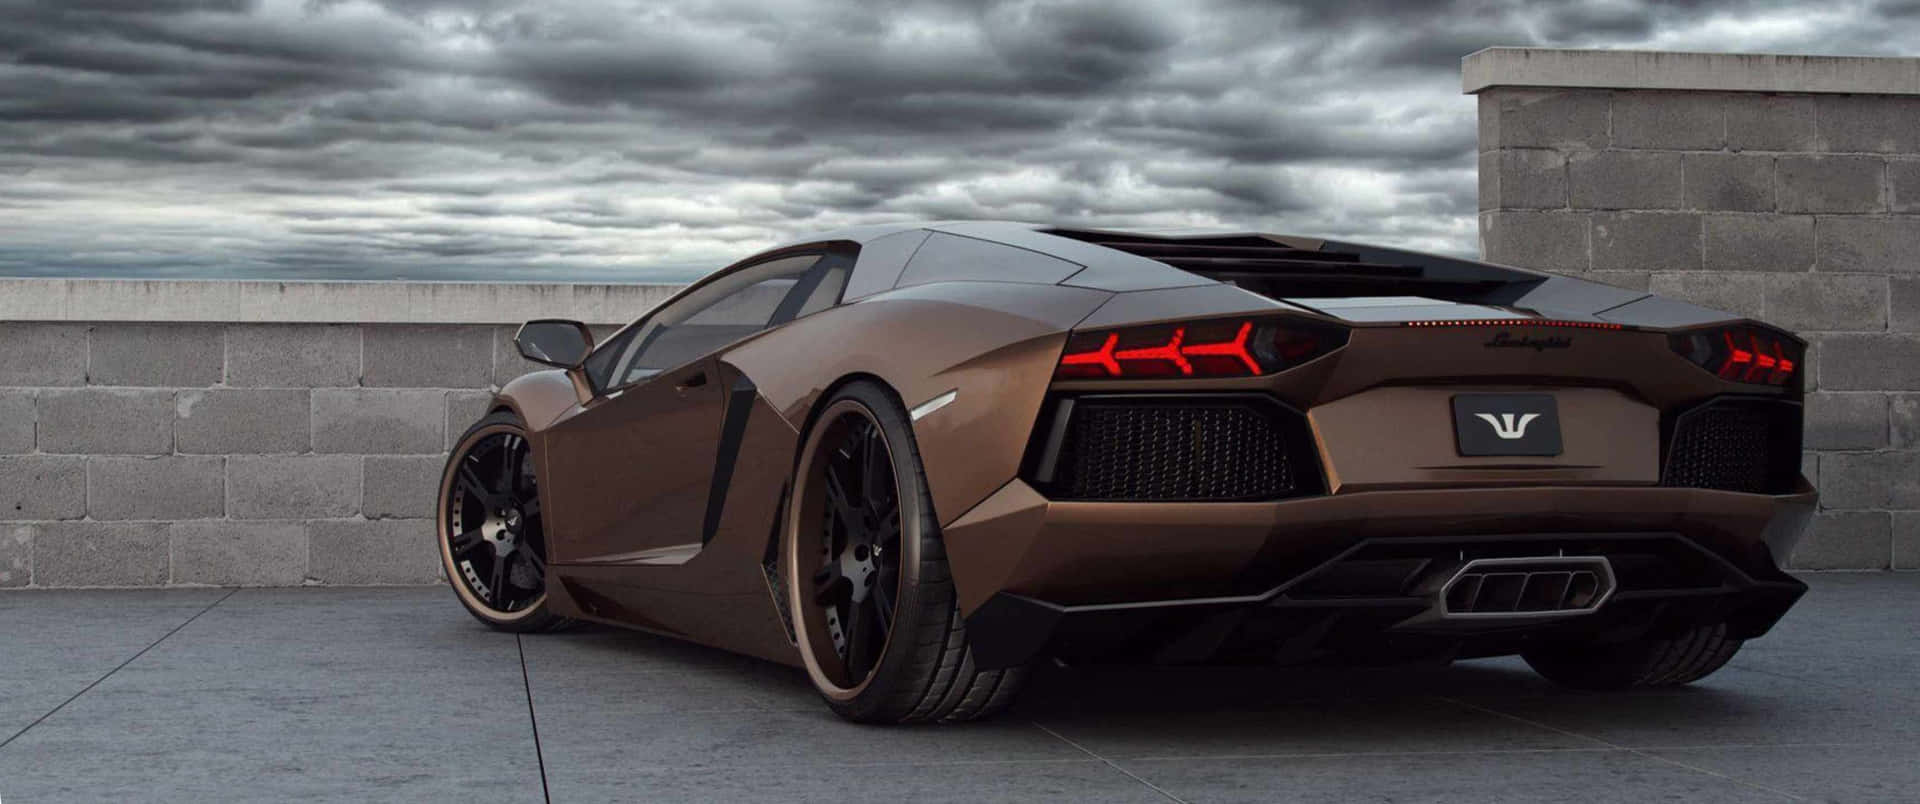 Luxury Performance: Show Off your Lamborghini on a 3440x1440p Background